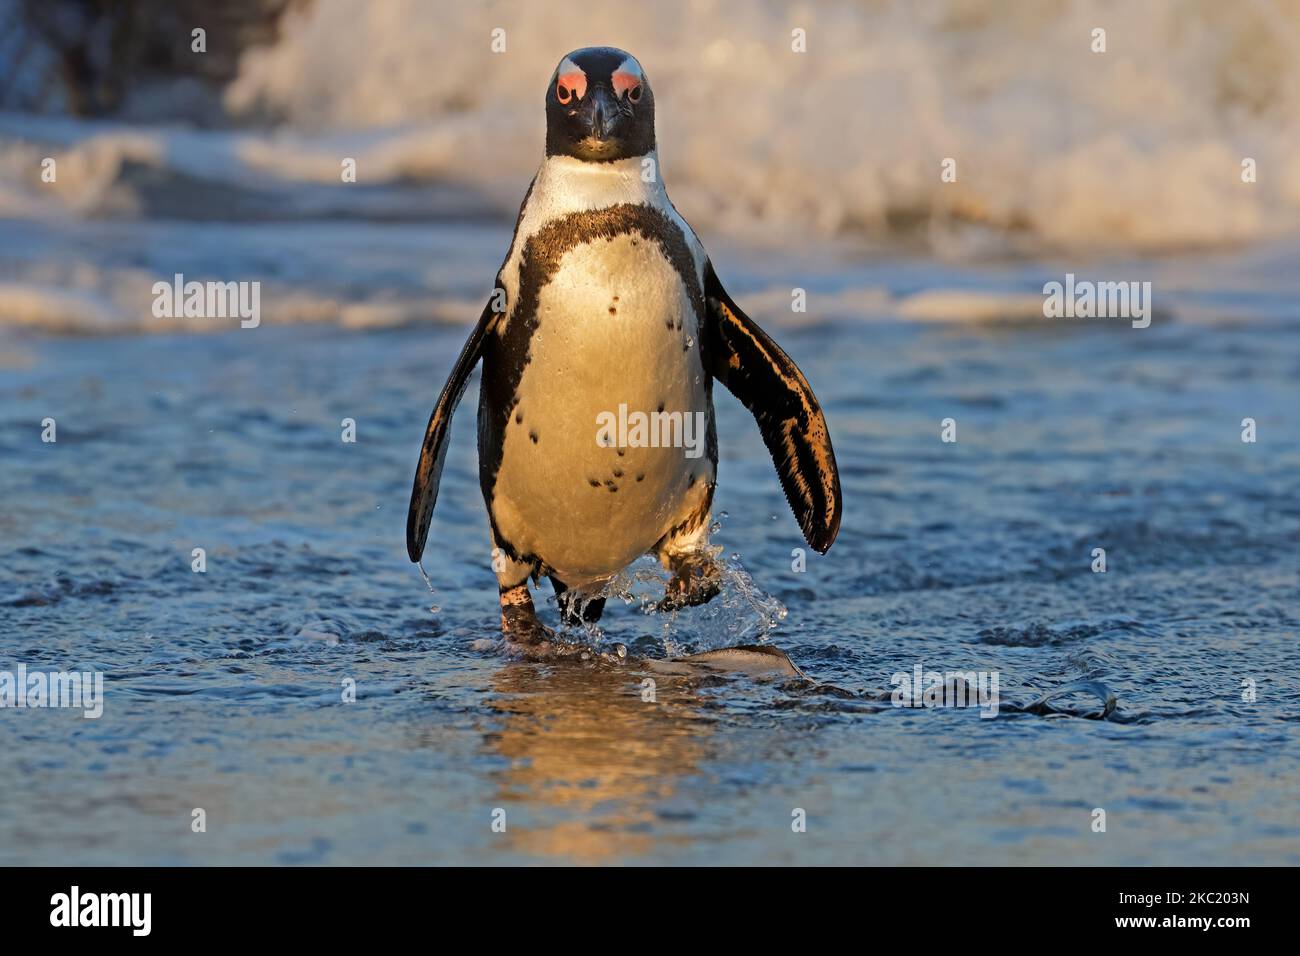 An African penguin (Spheniscus demersus) walking on the beach, South Africa Stock Photo